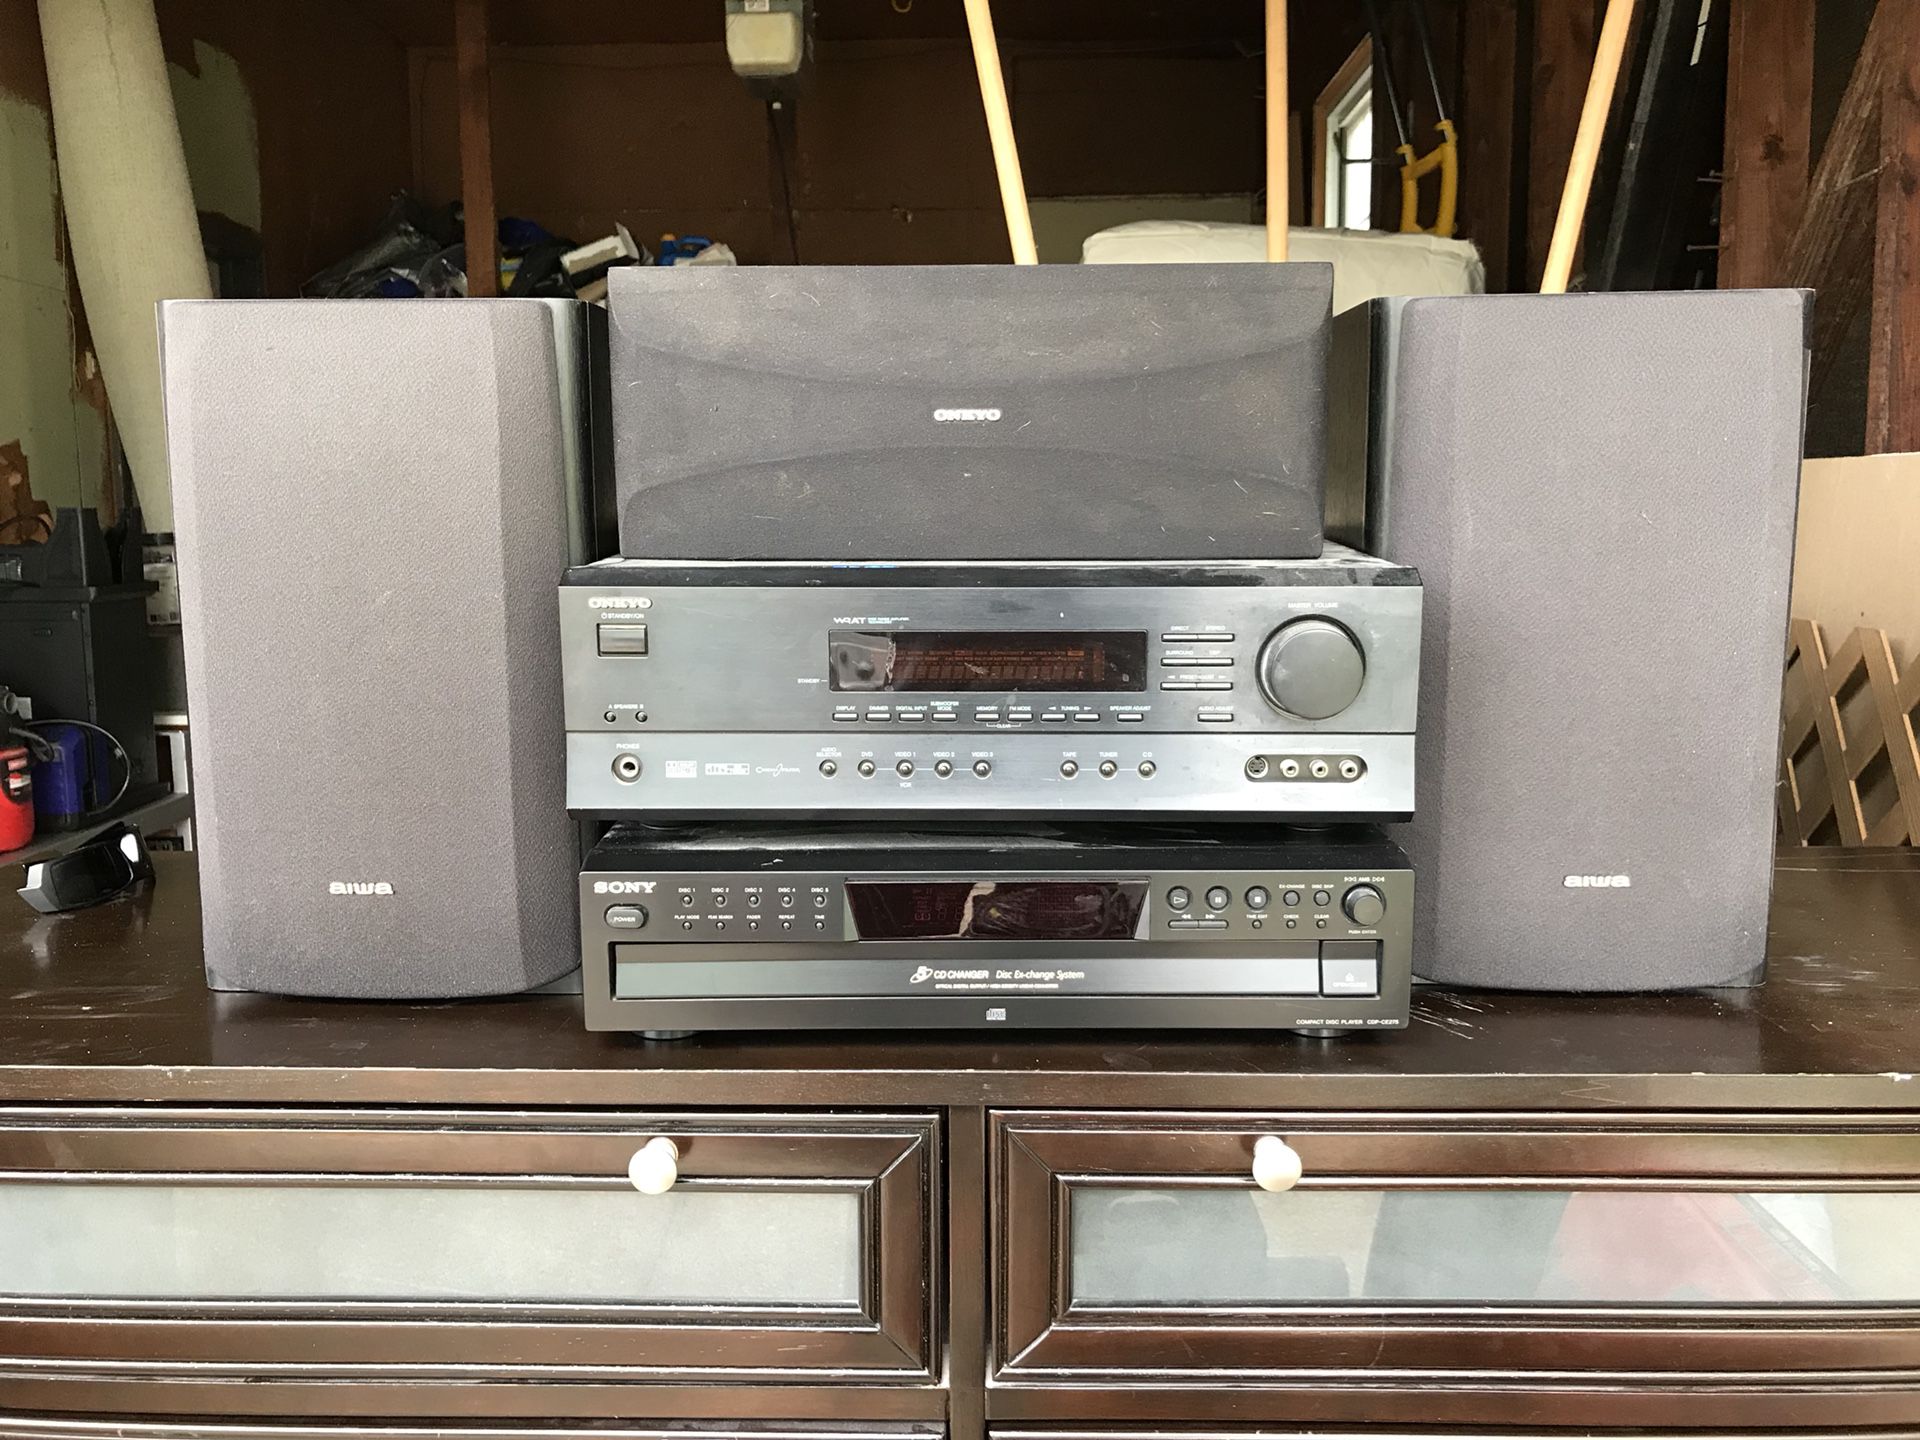 Onkyo receiver, Sony 5 disc changer, speakers and subwoofer.